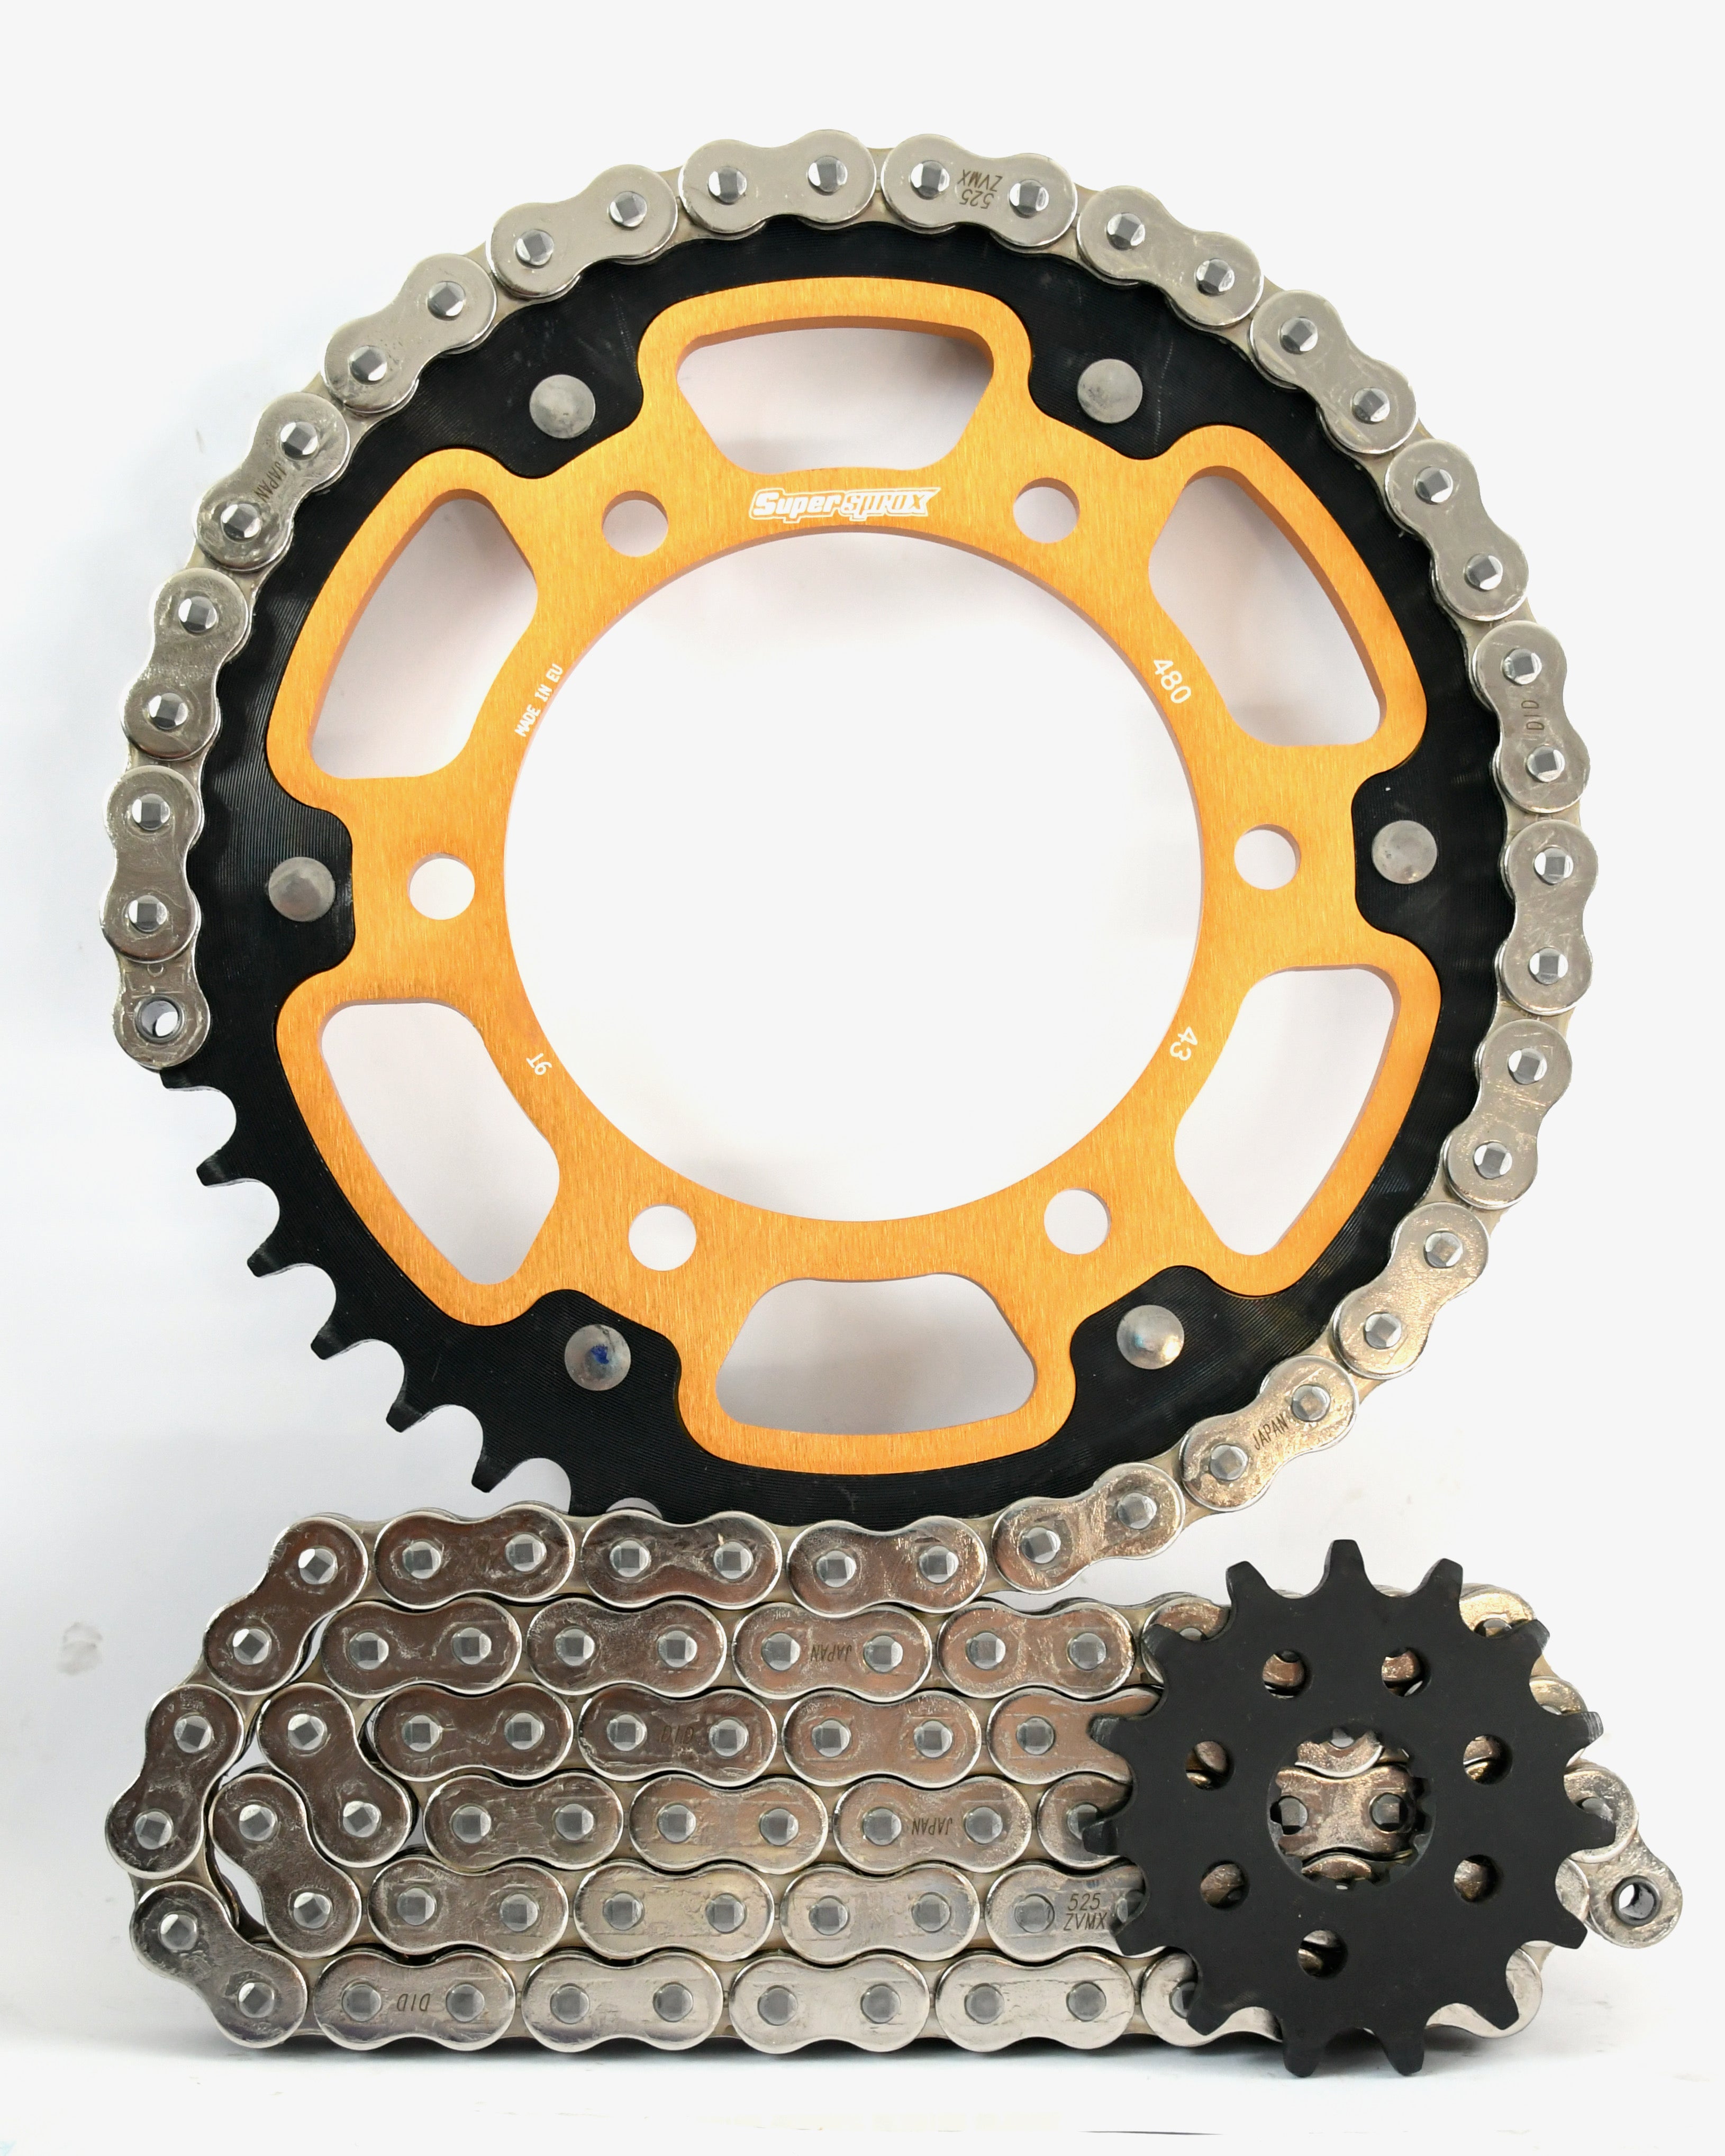 Supersprox Chain and Sprocket Kit - BMW S1000RR & R 2015-2018 - Standard Gearing